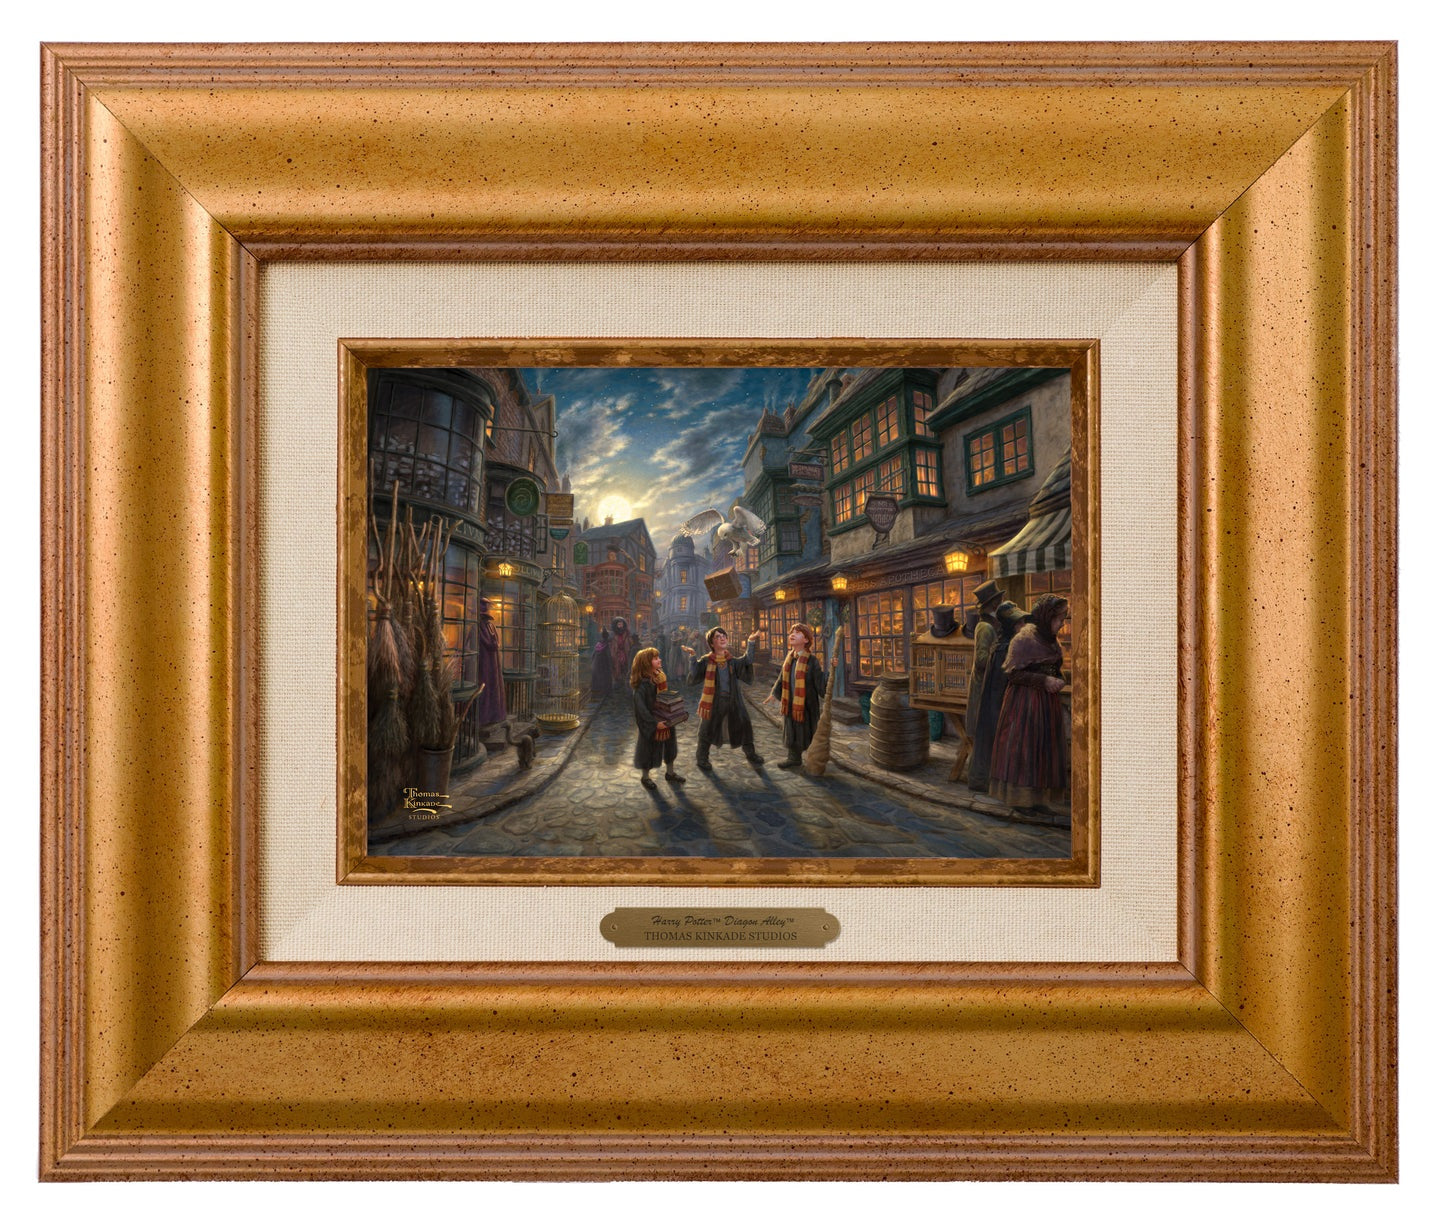 Harry Potter, Ron Weasley, and Hermione Granger walking around Diagon Alley. Gold Frame